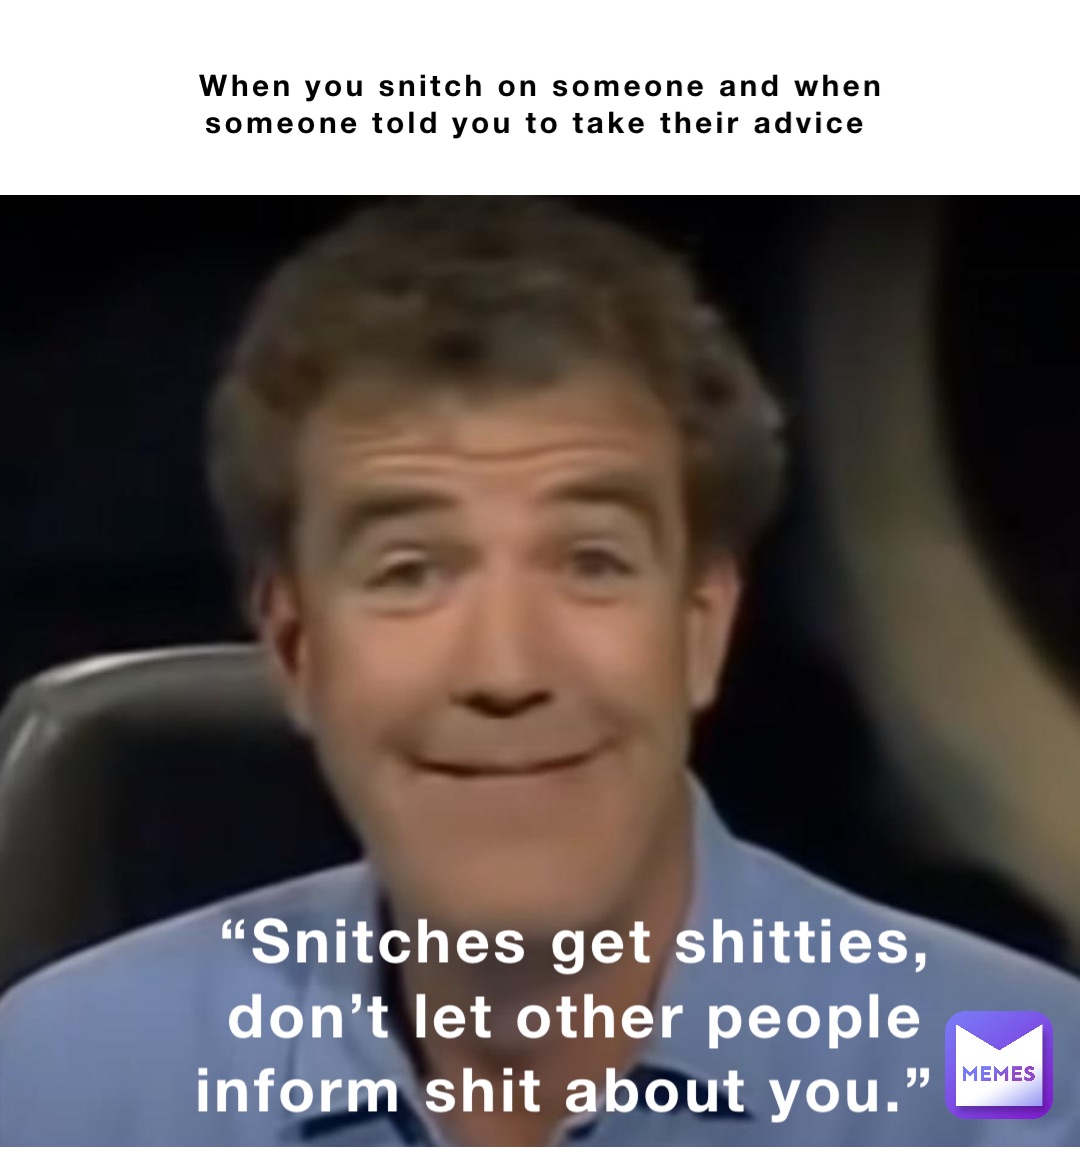 When you snitch on someone and when someone told you to take their advice “Snitches get shitties, don’t let other people inform shit about you.”